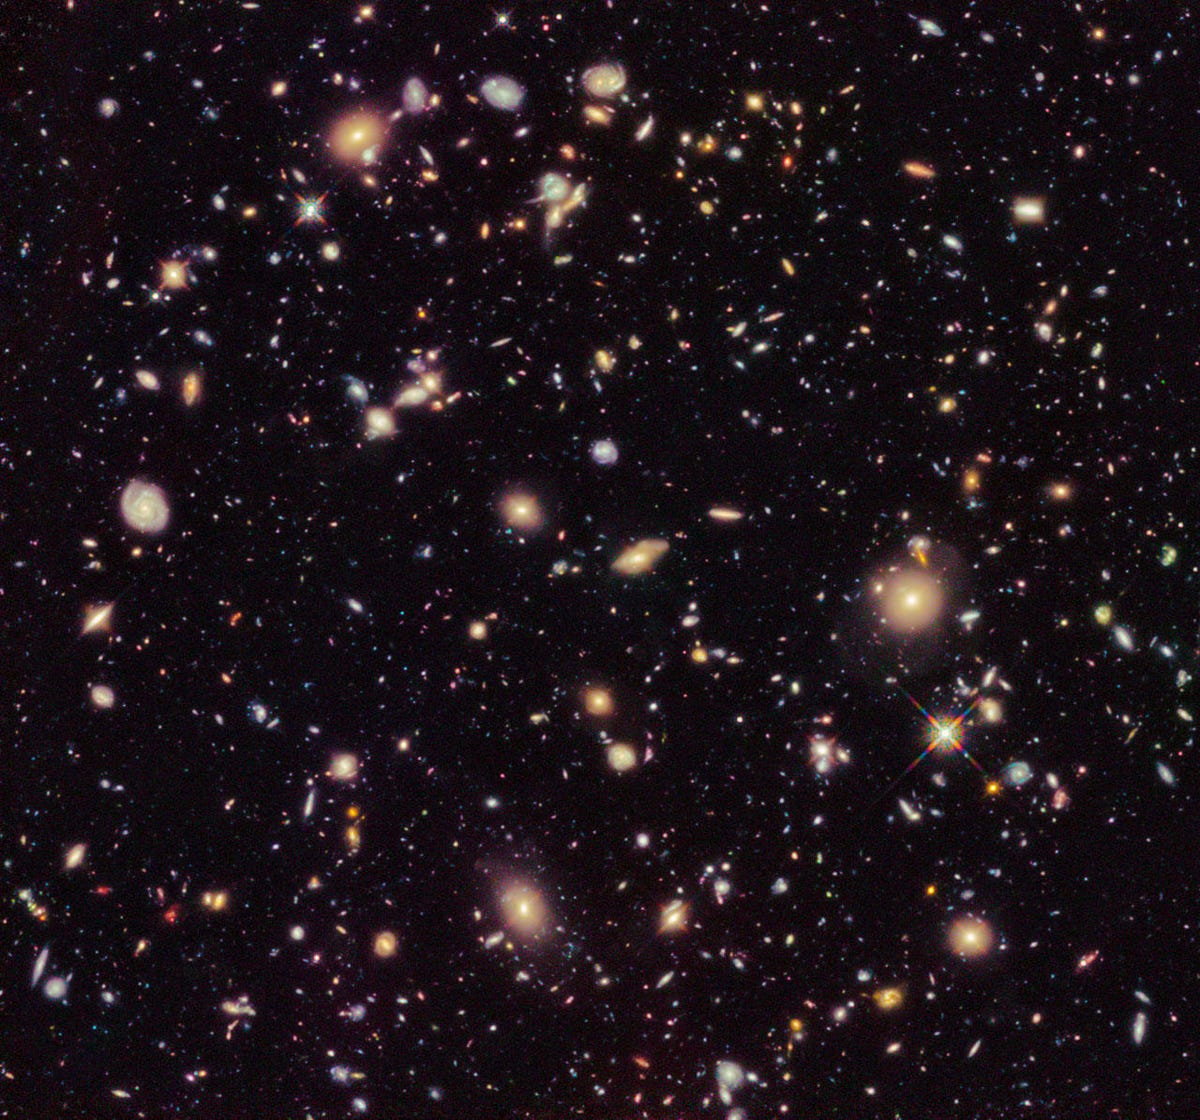 A spray of galaxies and stars looking small against the darkness of space.